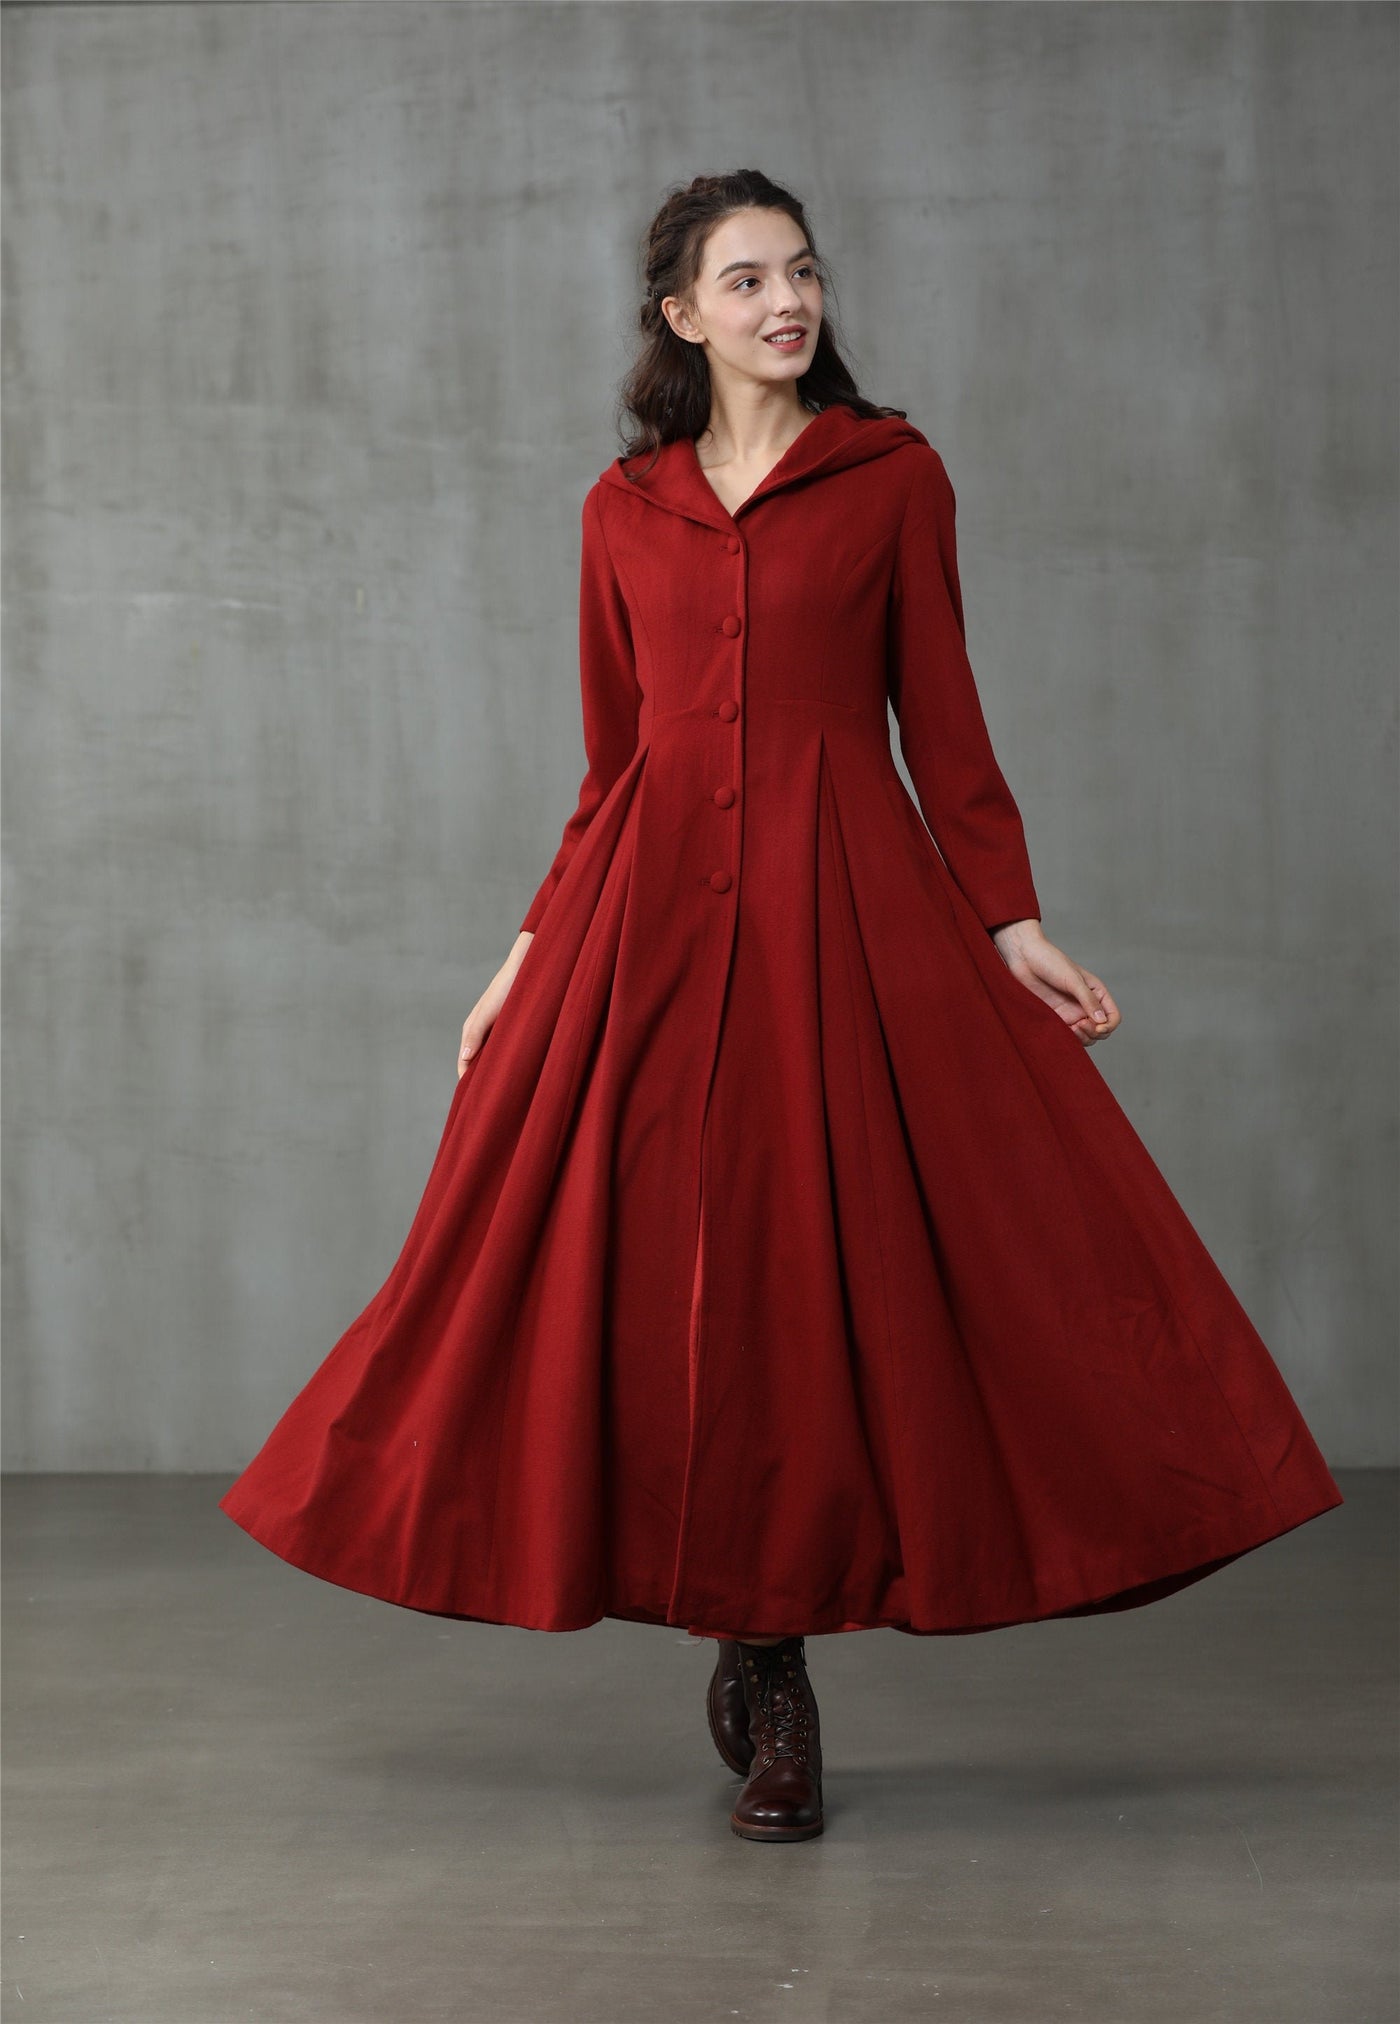 My Fair Lady | Red Hooded Coat